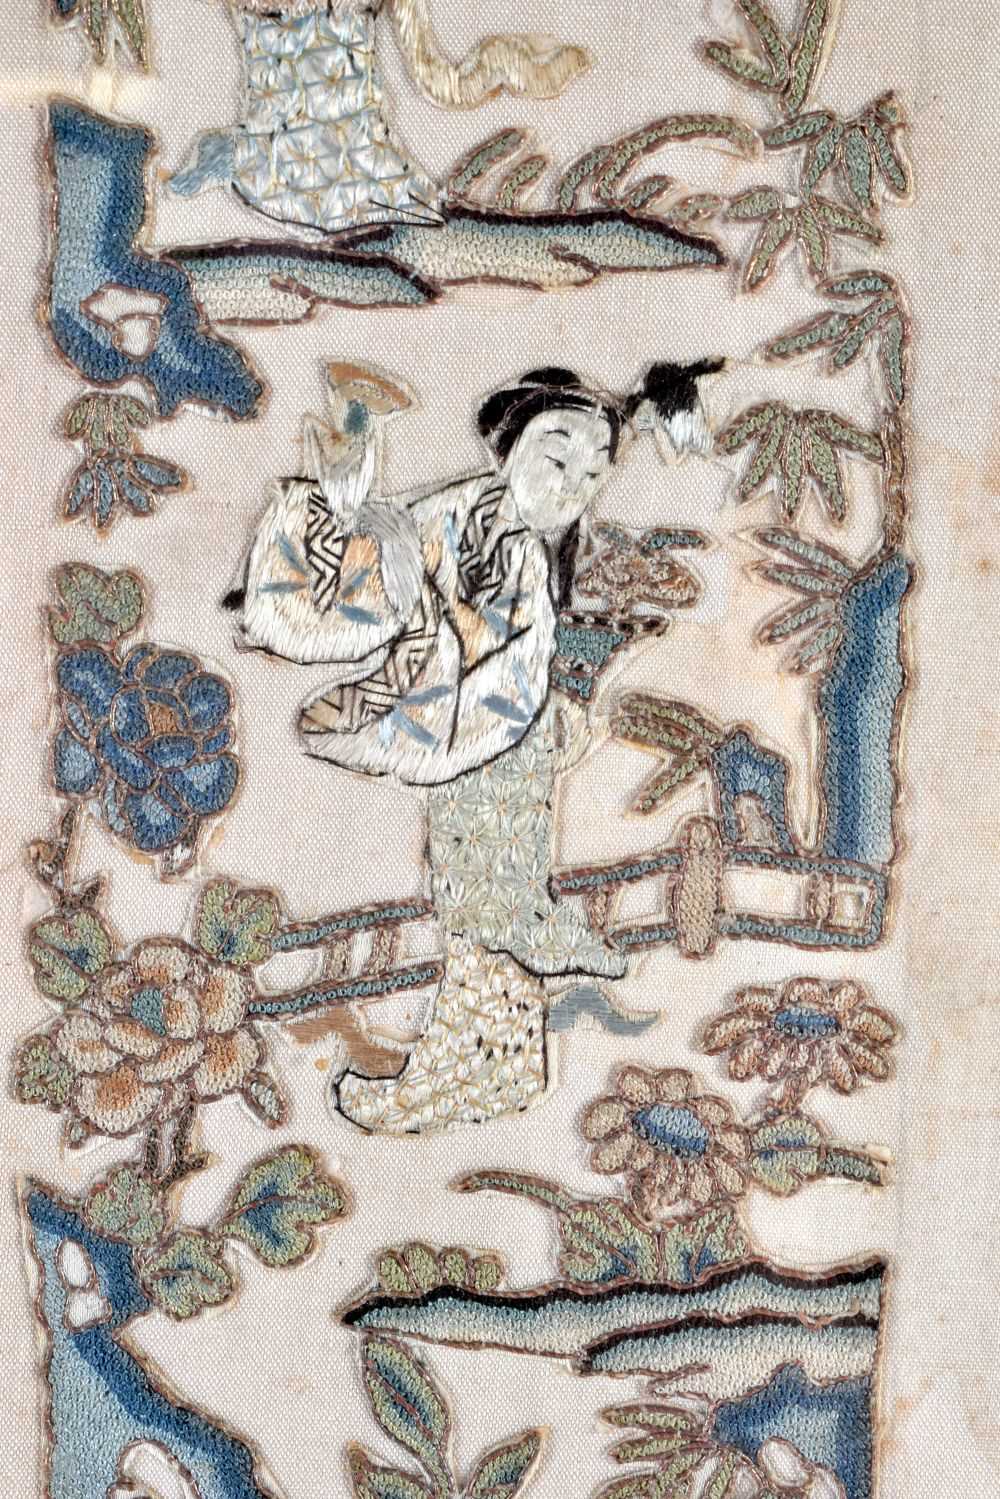 TWO 19TH CENTURY CHINESE SILK EMBROIDERED PANELS depicting birds and figures. Largest 50 cm x 10 cm. - Image 3 of 6